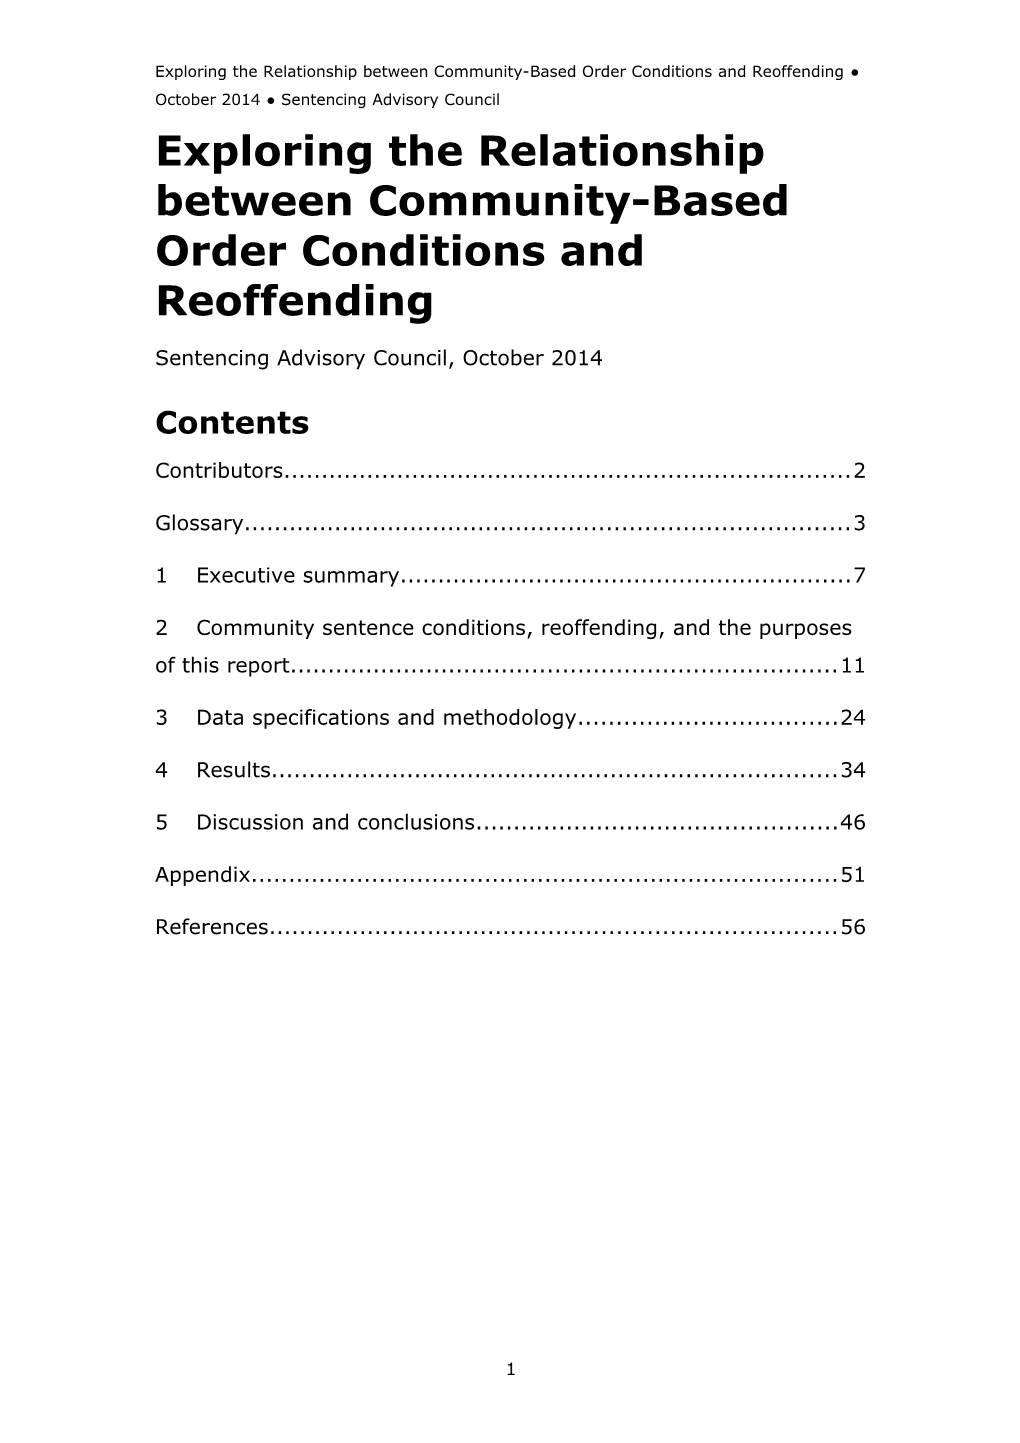 Exploring the Relationship Between Community-Based Order Conditions and Reoffending